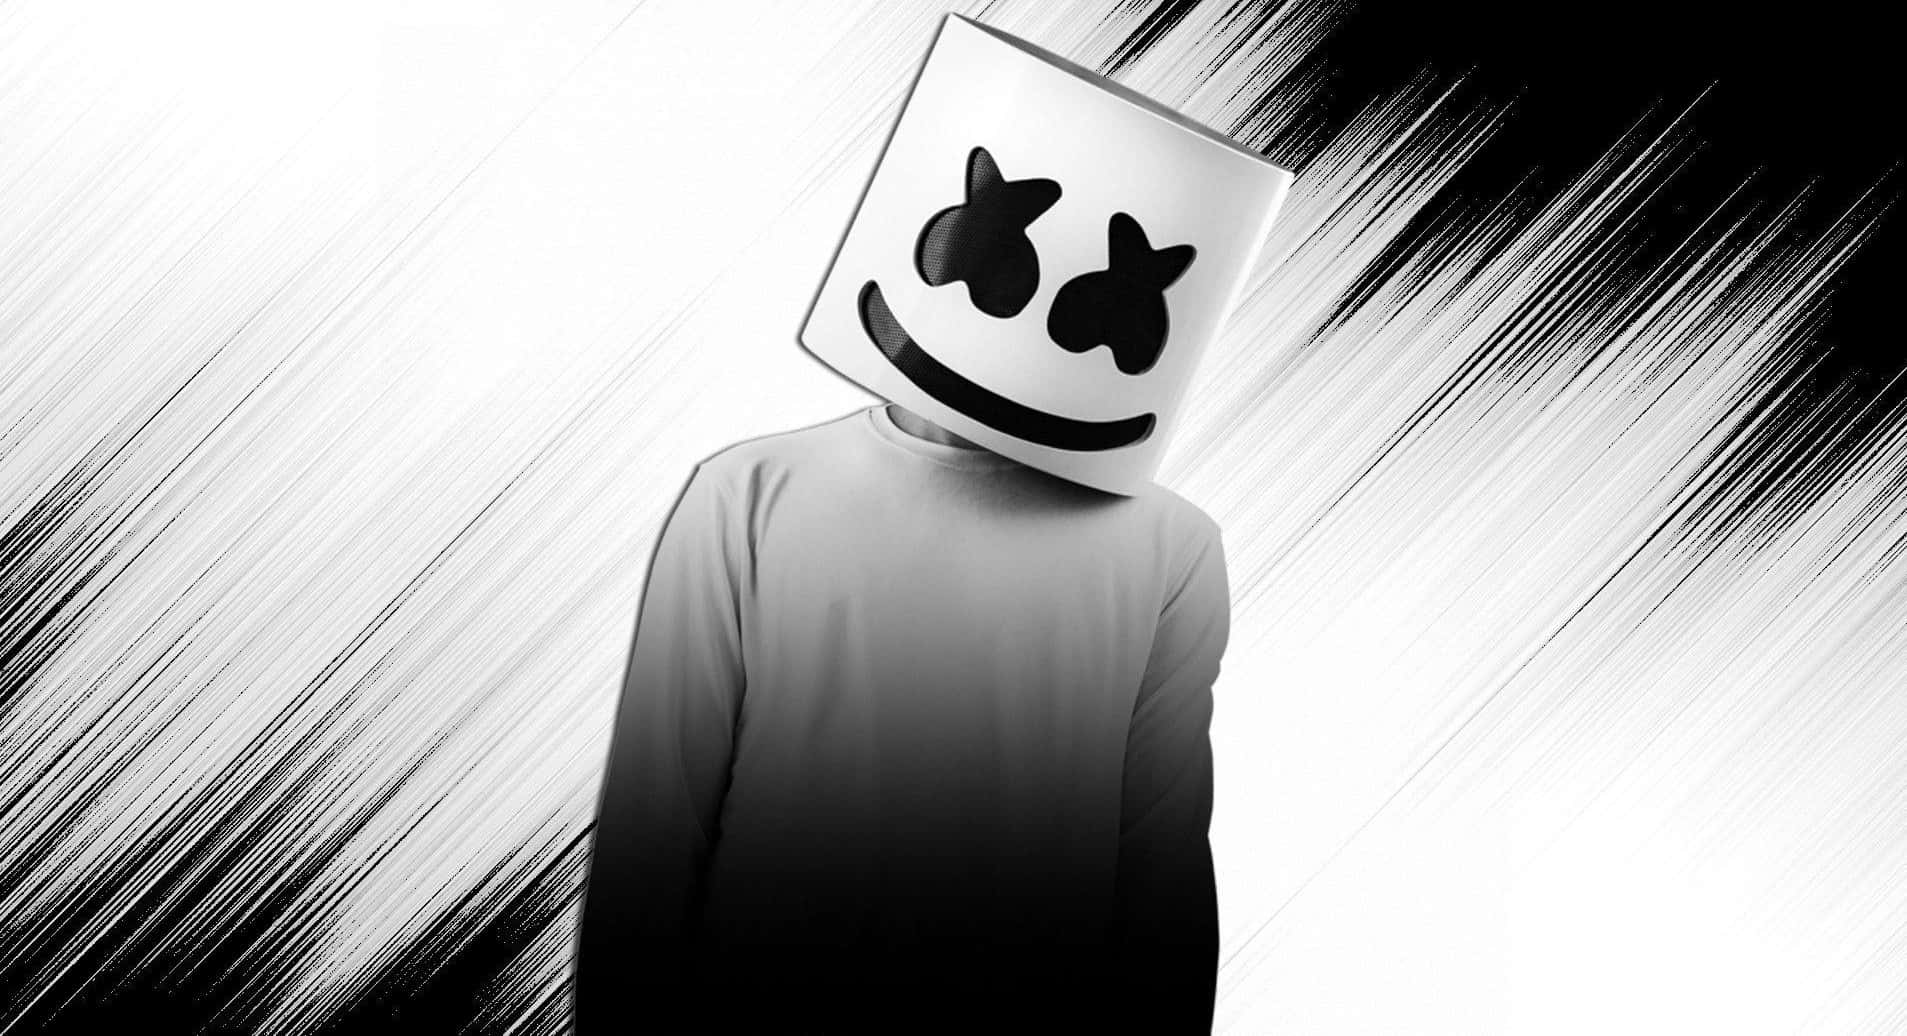 Get Pumped Up with Marshmello!